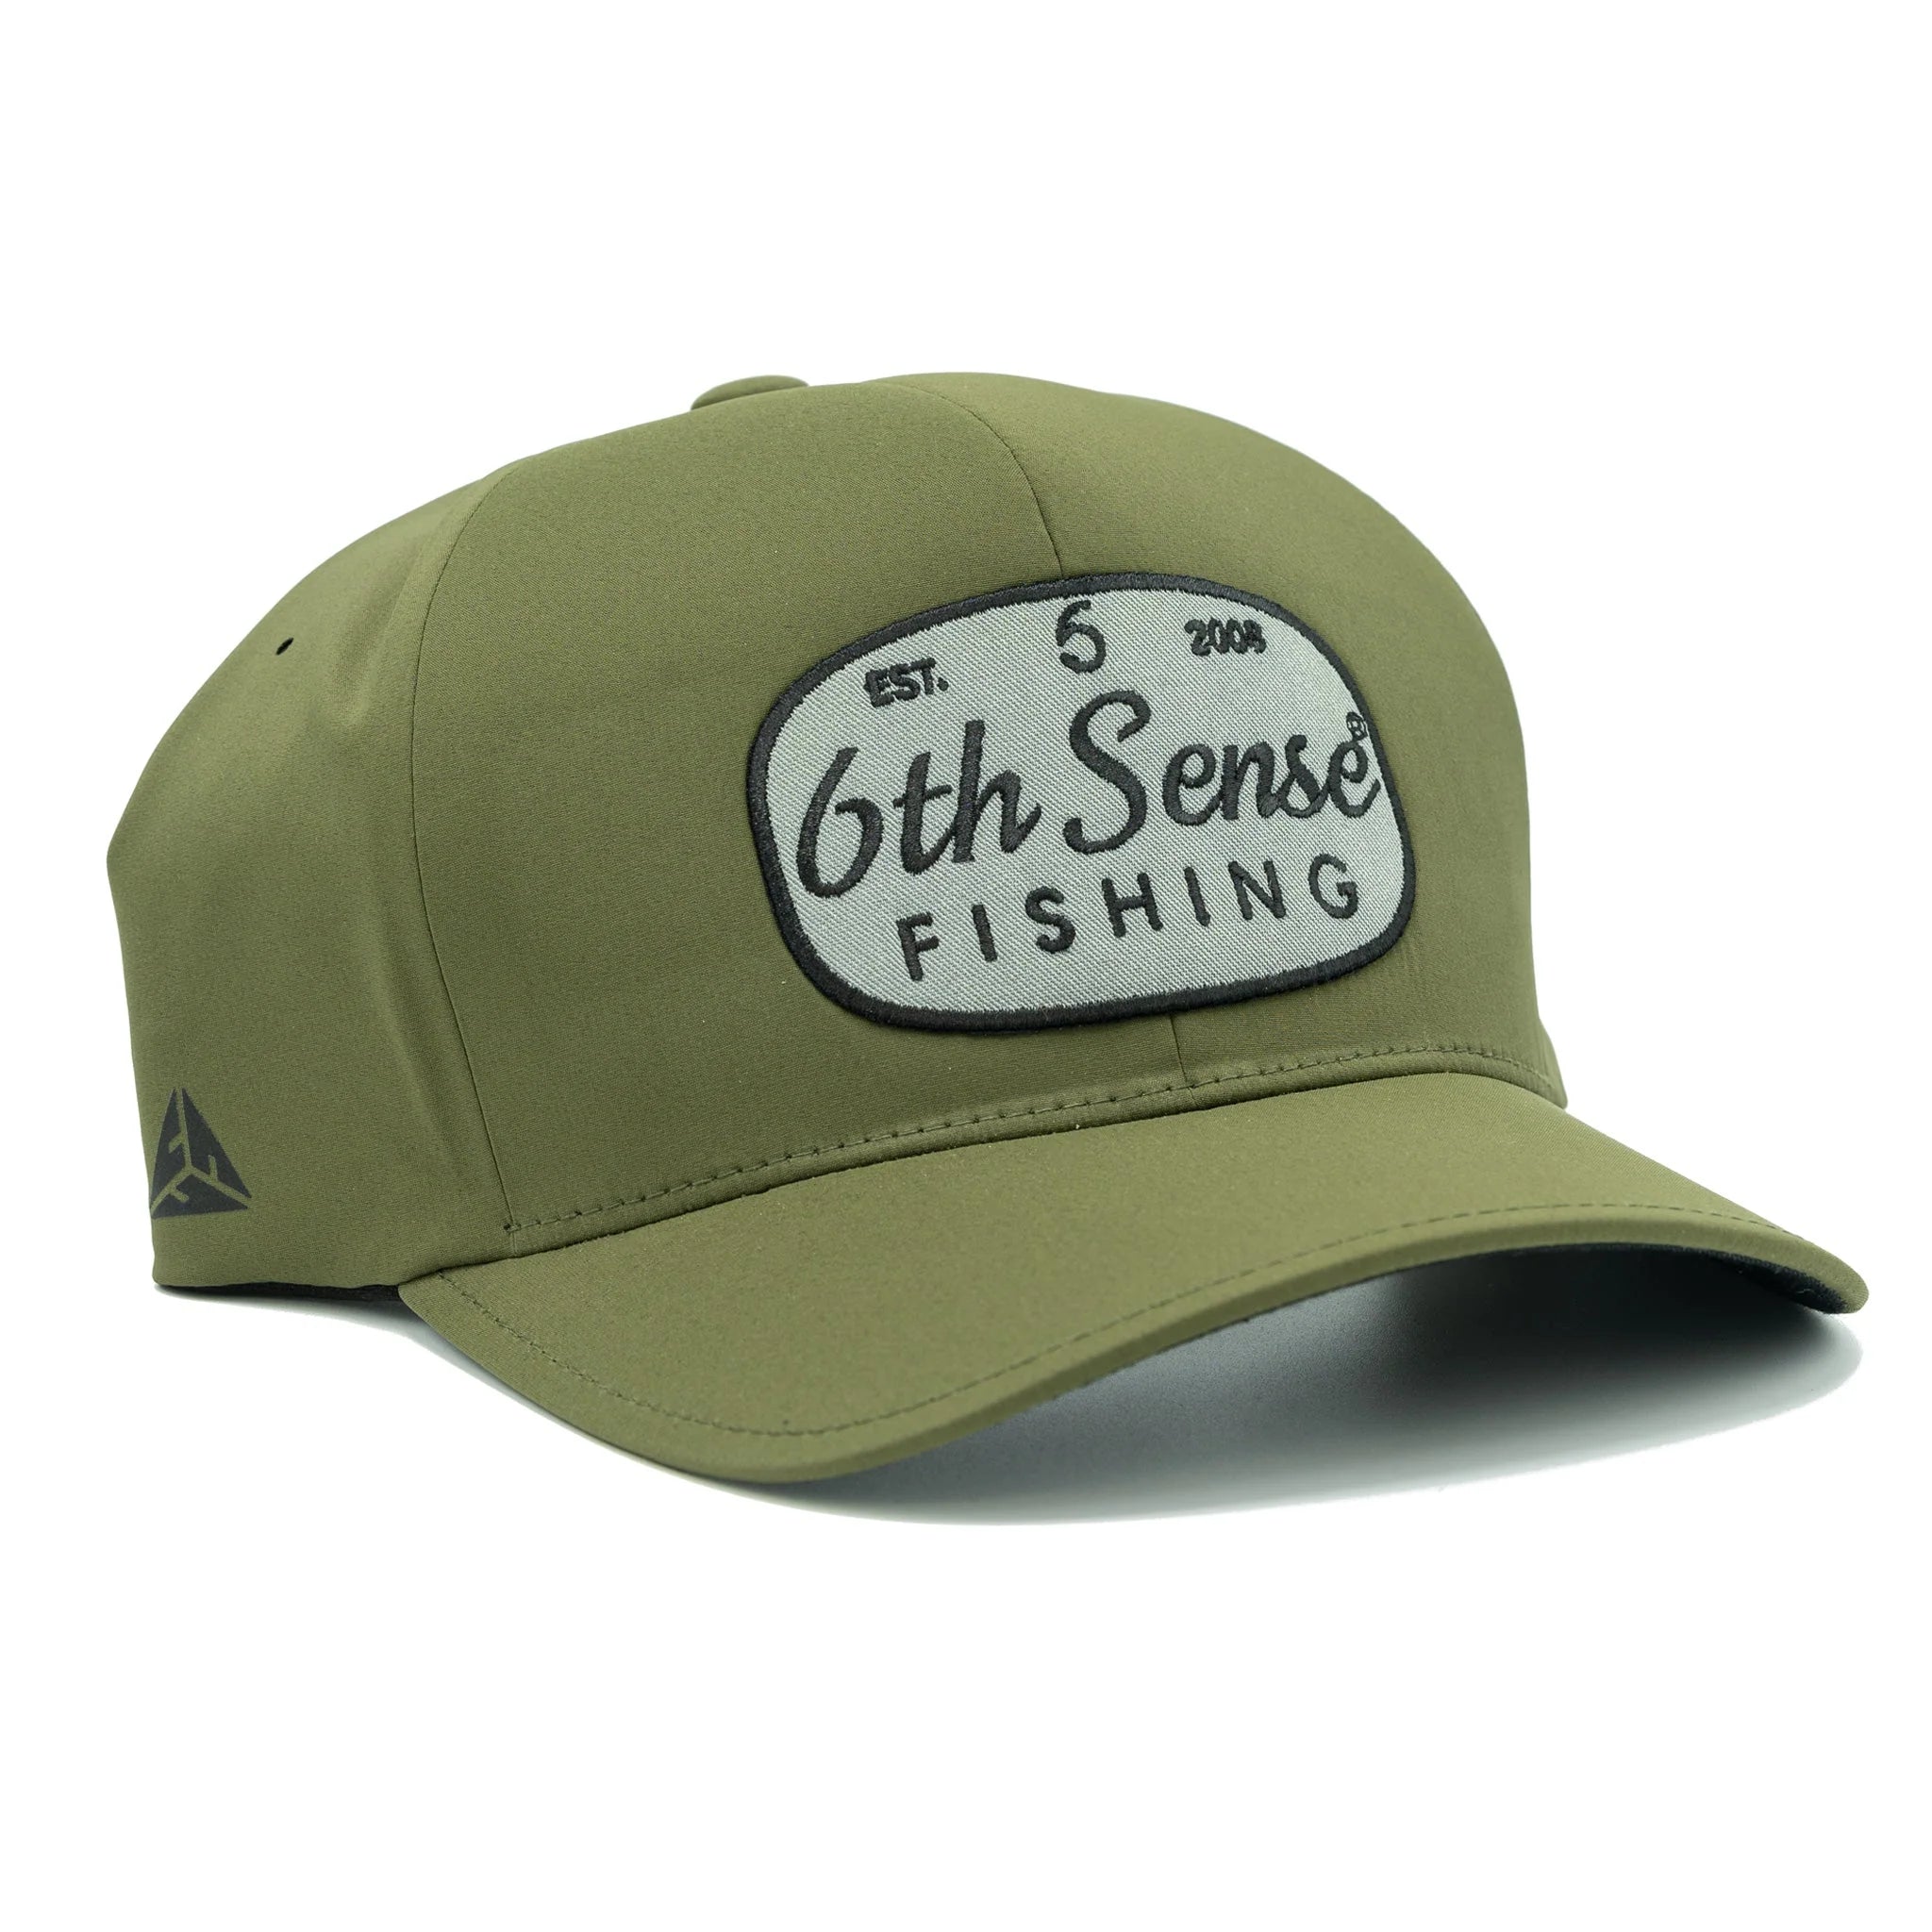 6th Sense Fishing - Fitted Hats - The Stamp - Loden/Black S/M